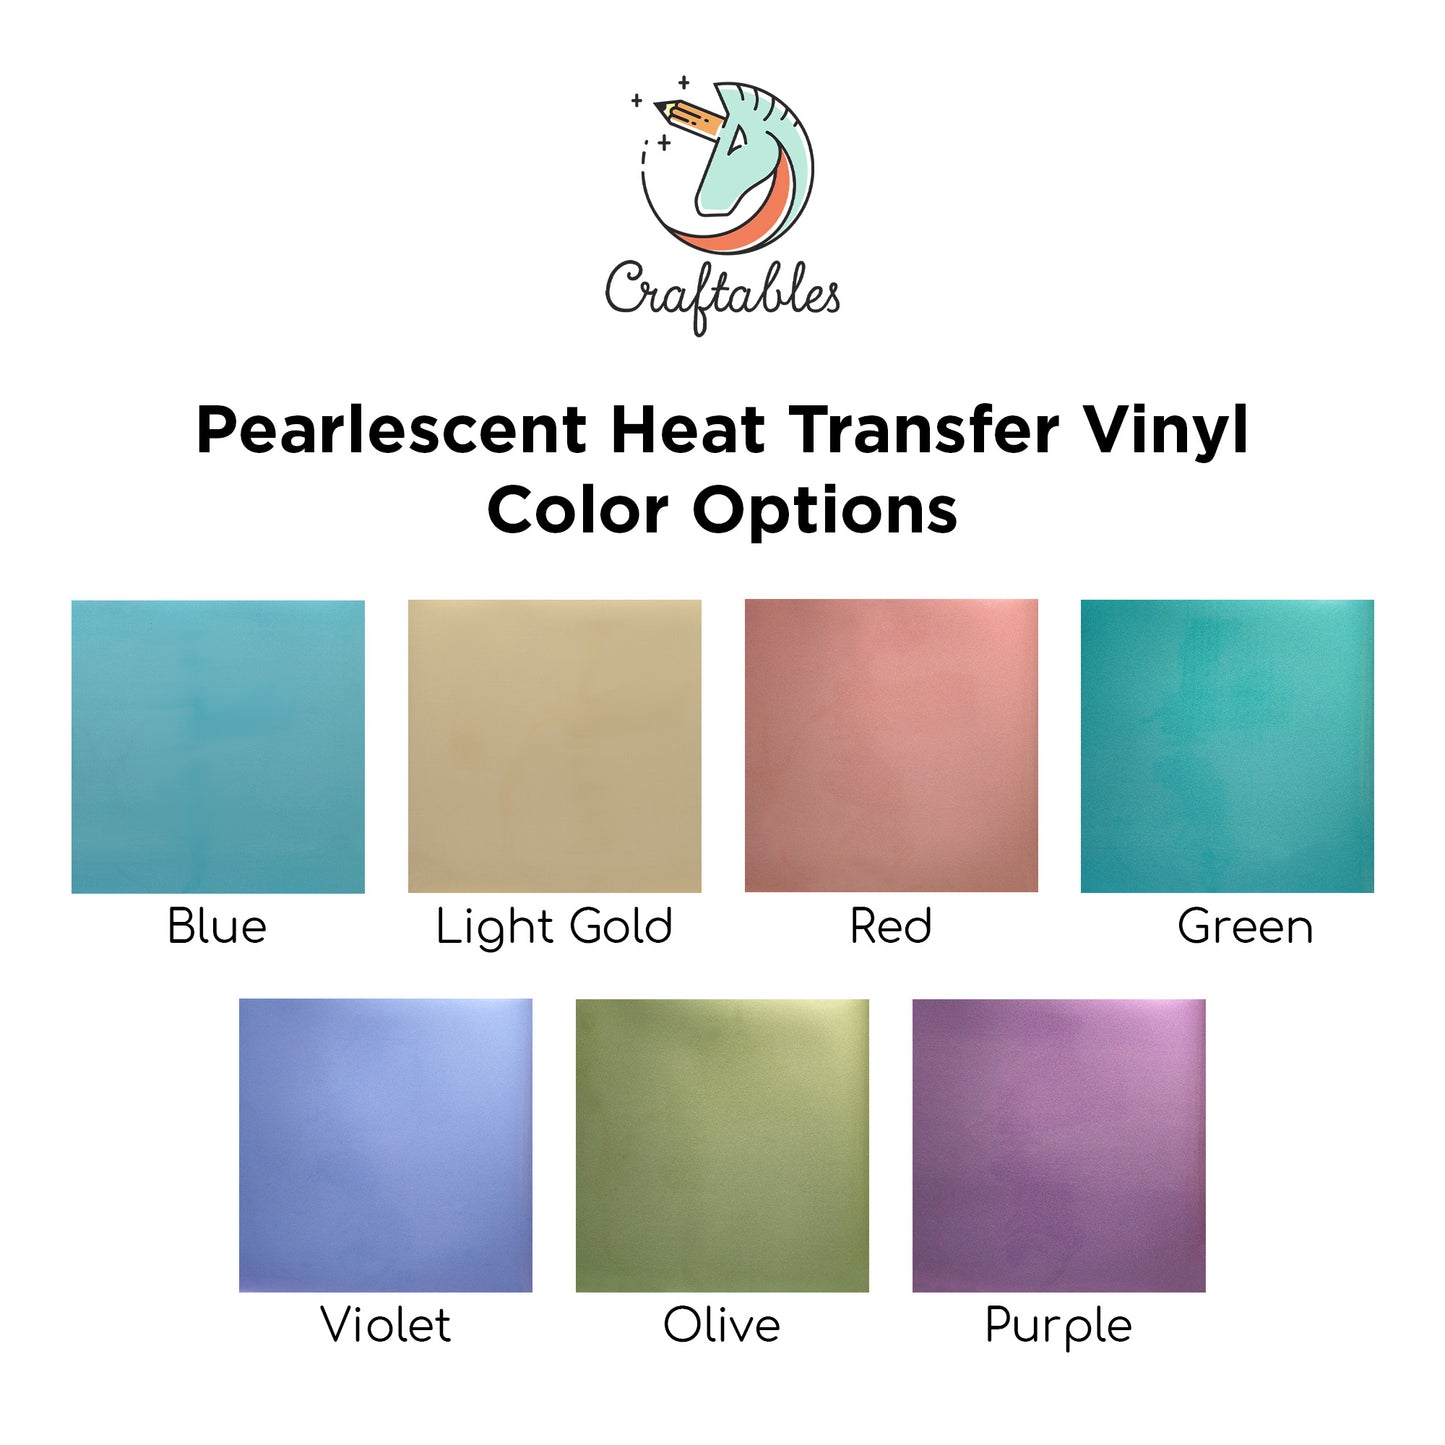 Red Pearlescent Heat Transfer Vinyl Rolls By Craftables